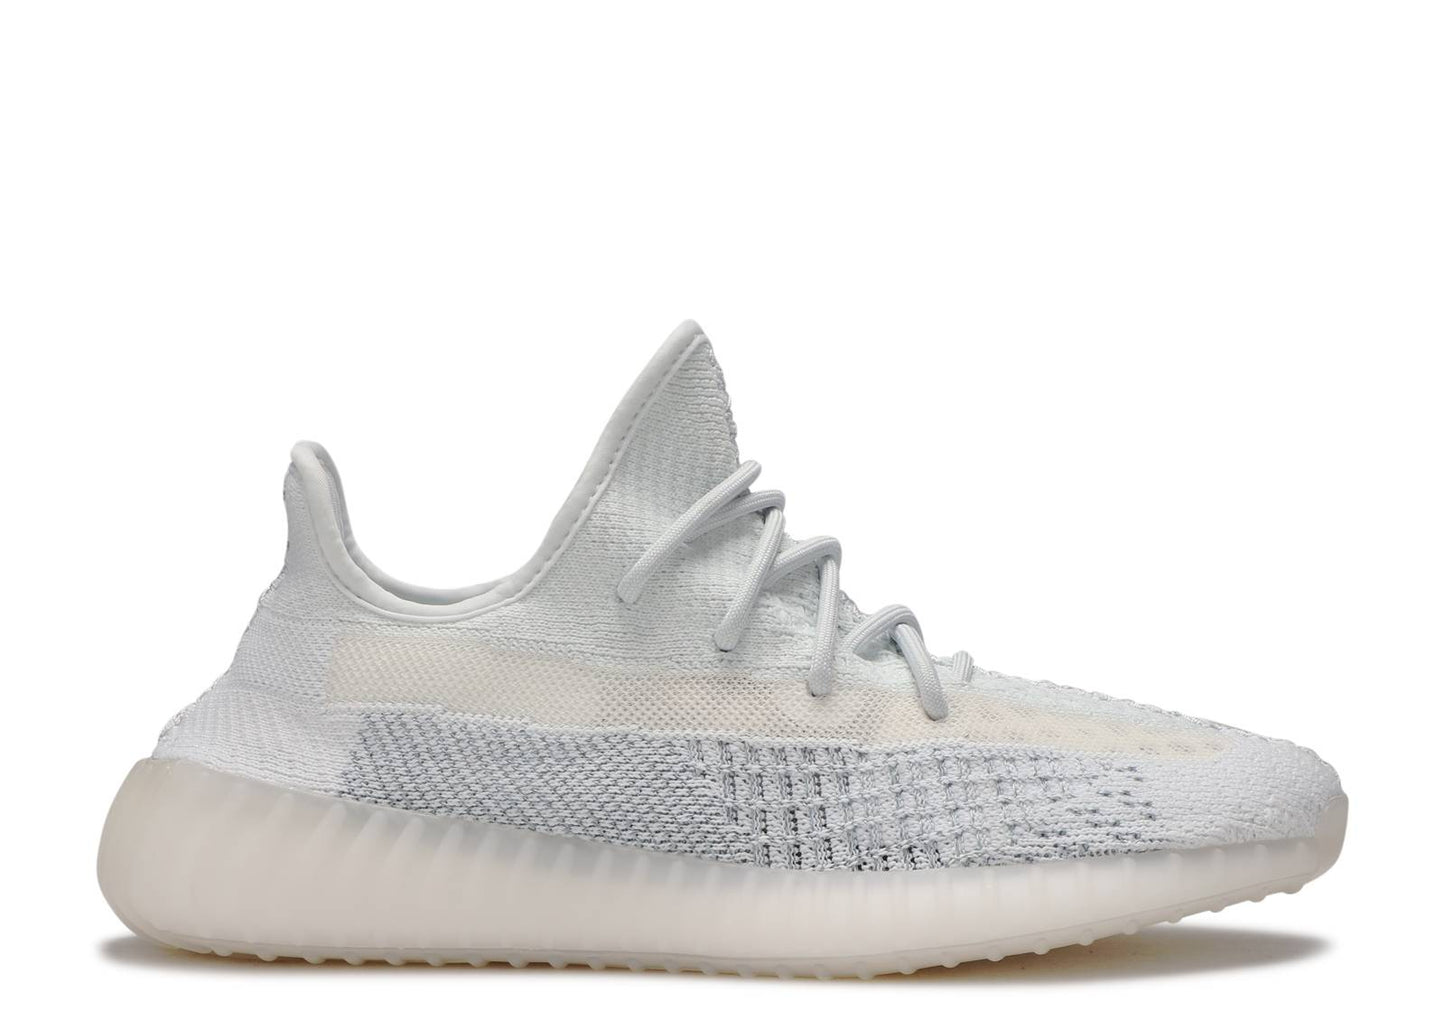 Adidas Yeezy Boost 350 V2 Cloud White 'Reflective'